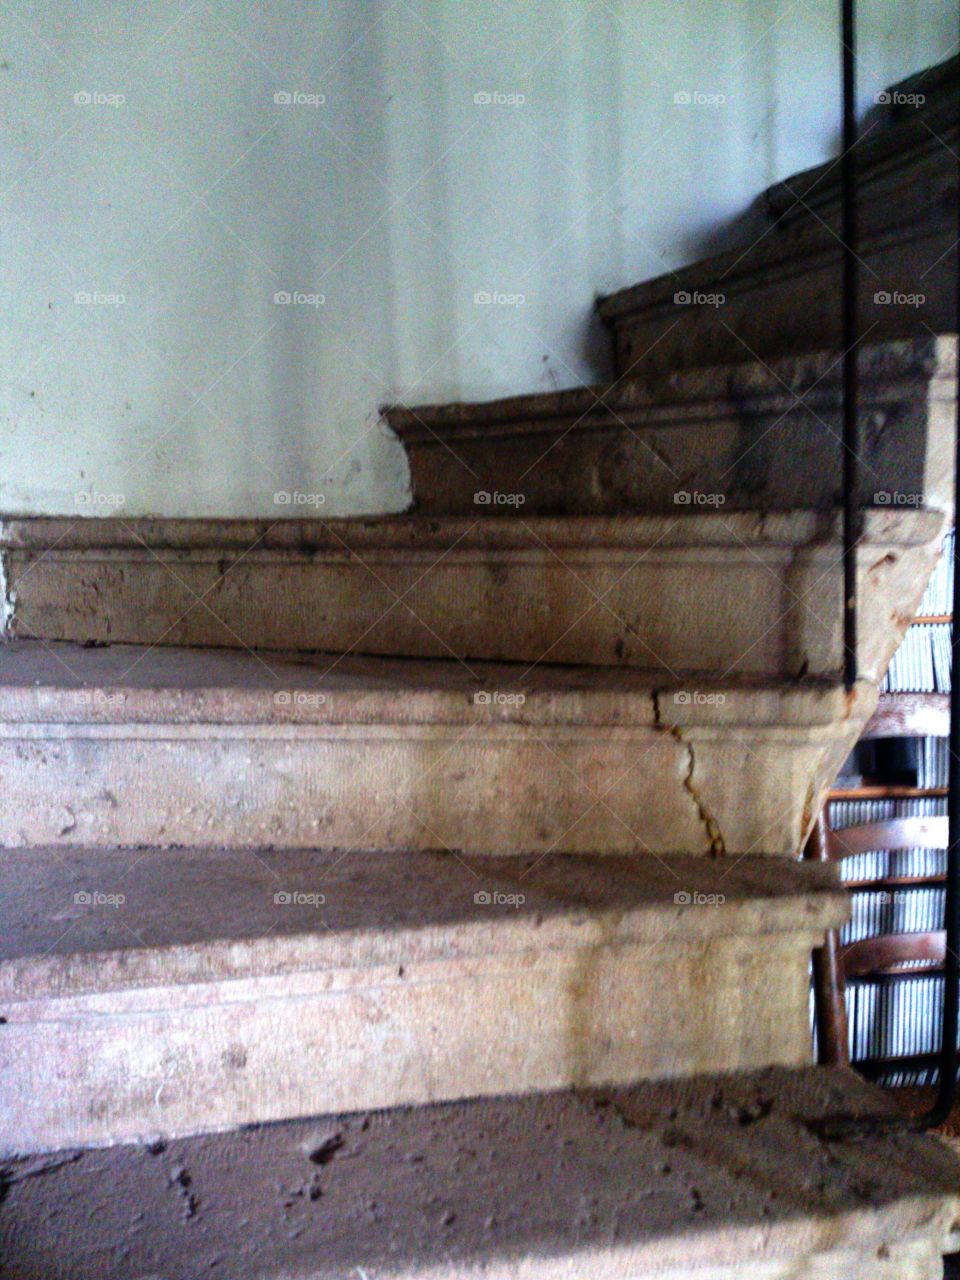 Up the stairs. Very old house in Burgundy, France